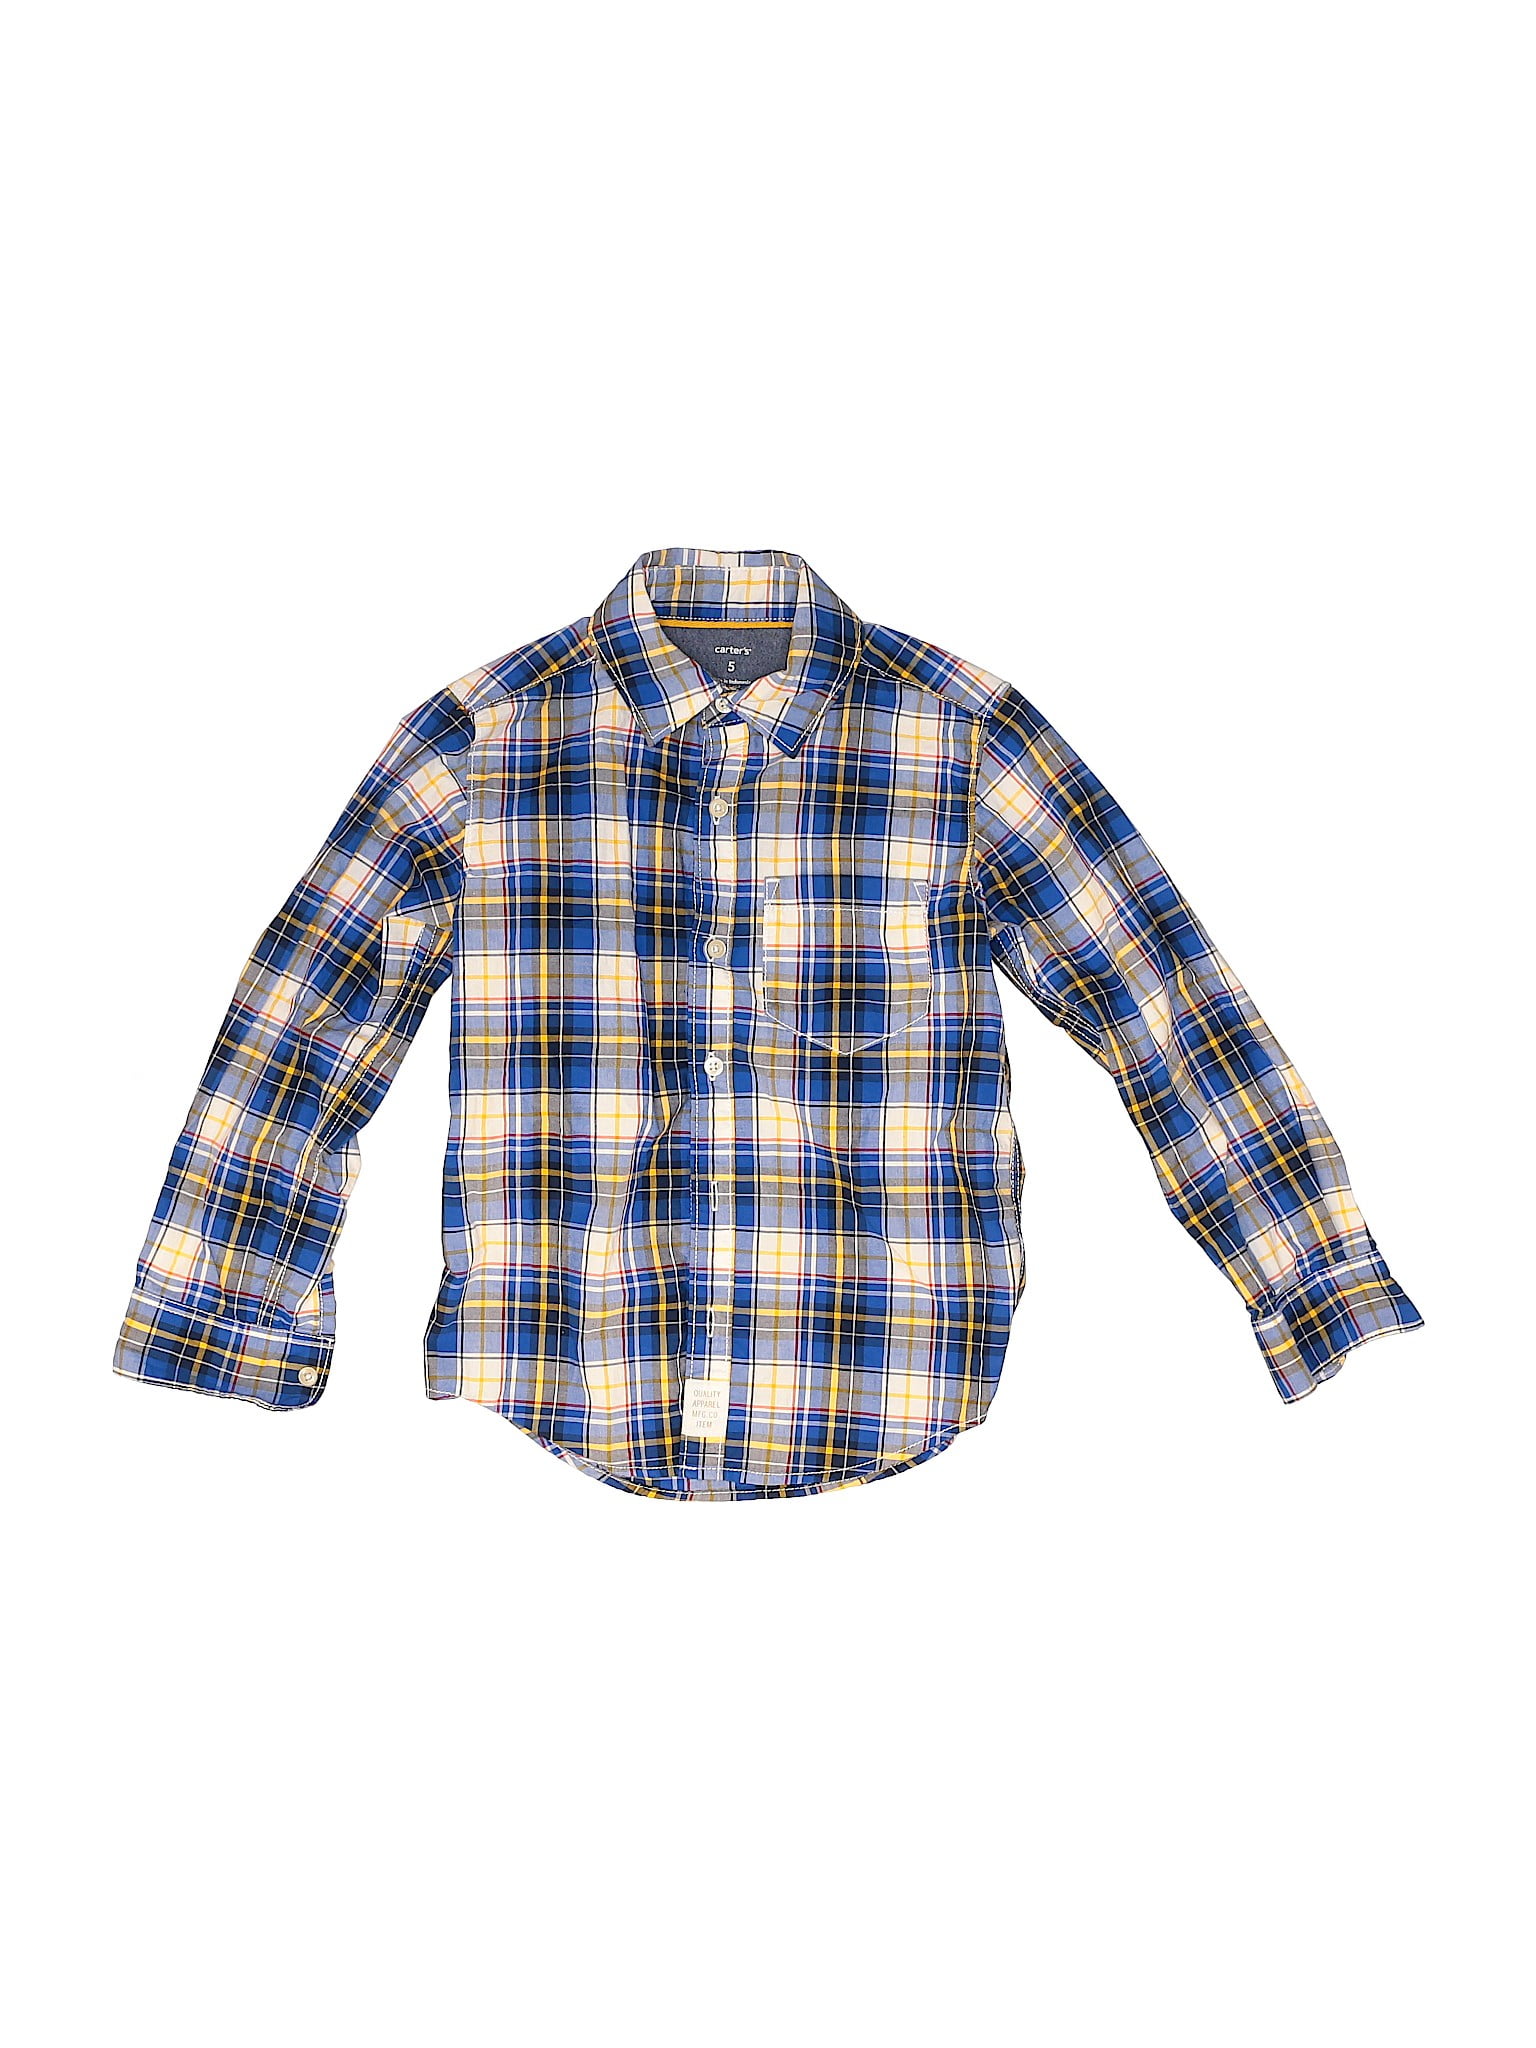 Carter's - Pre-Owned Carter's Boy's Size 5T Short Sleeve Button-Down ...